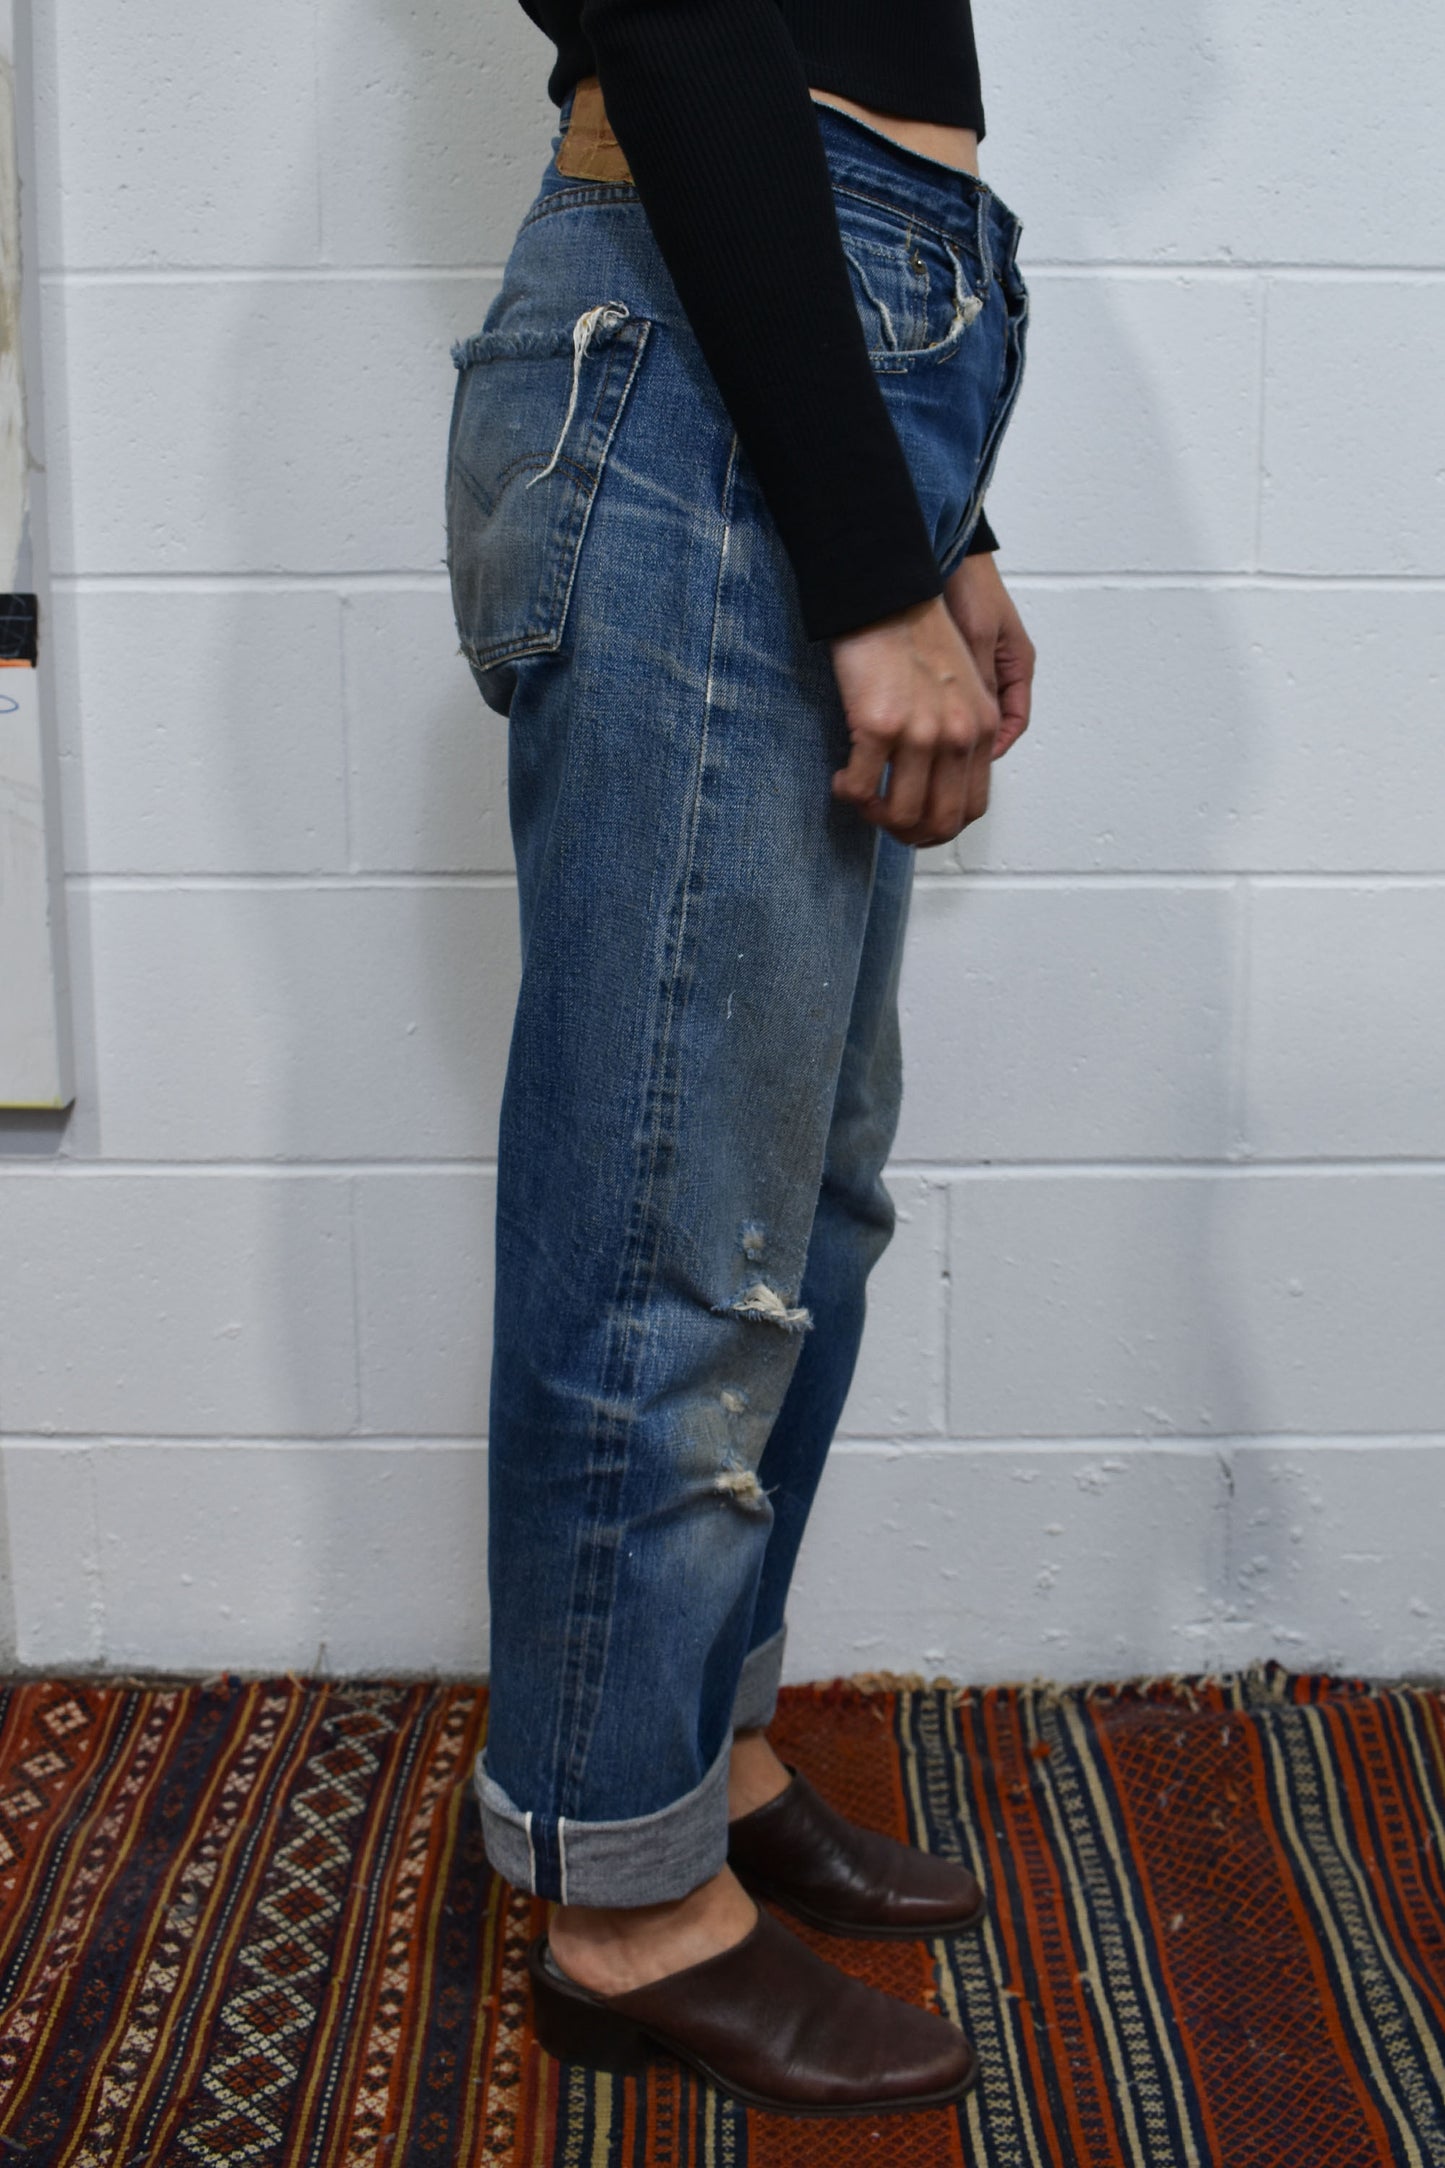 Vintage Early 1970's "Levis" 501 Selvedge Jeans